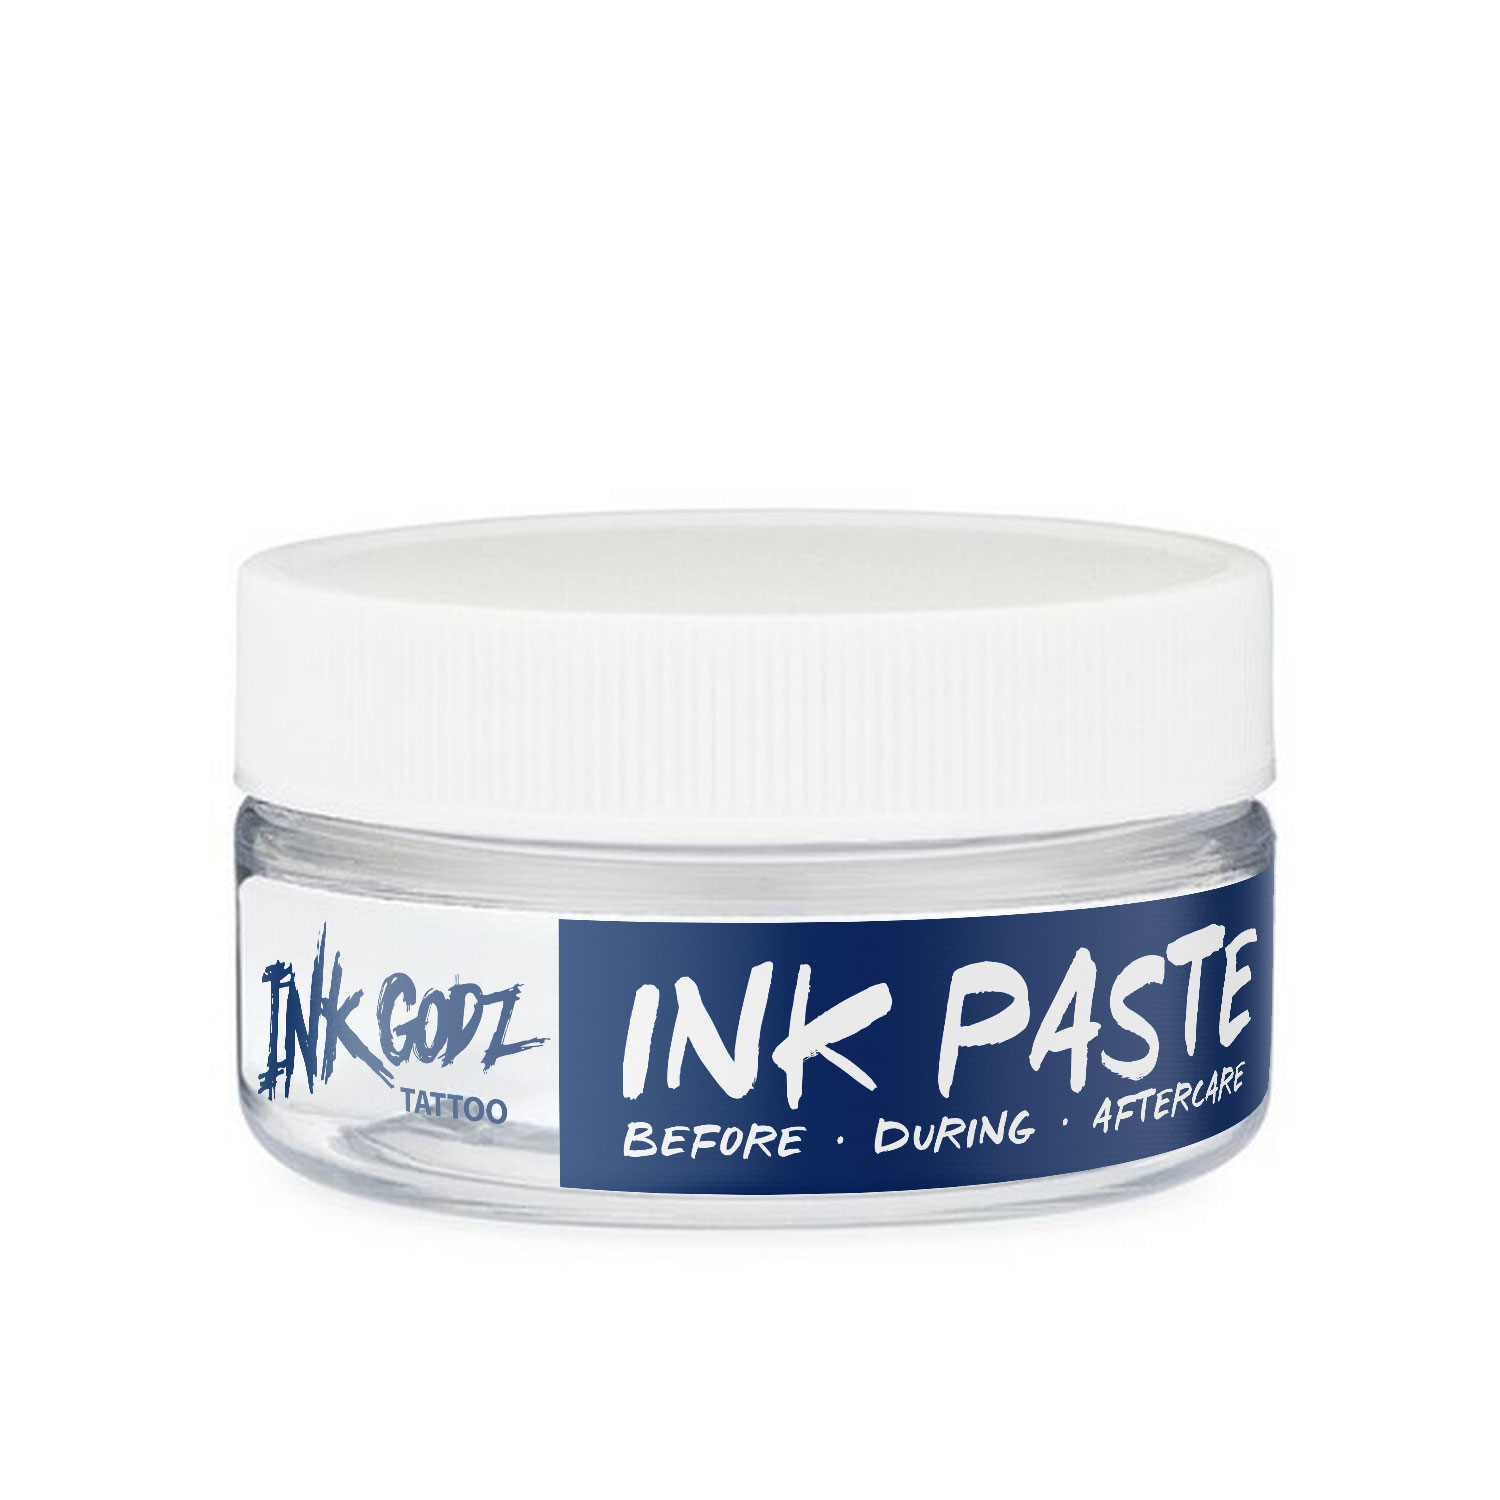 Ink Paste Tattoo Aftercare picture